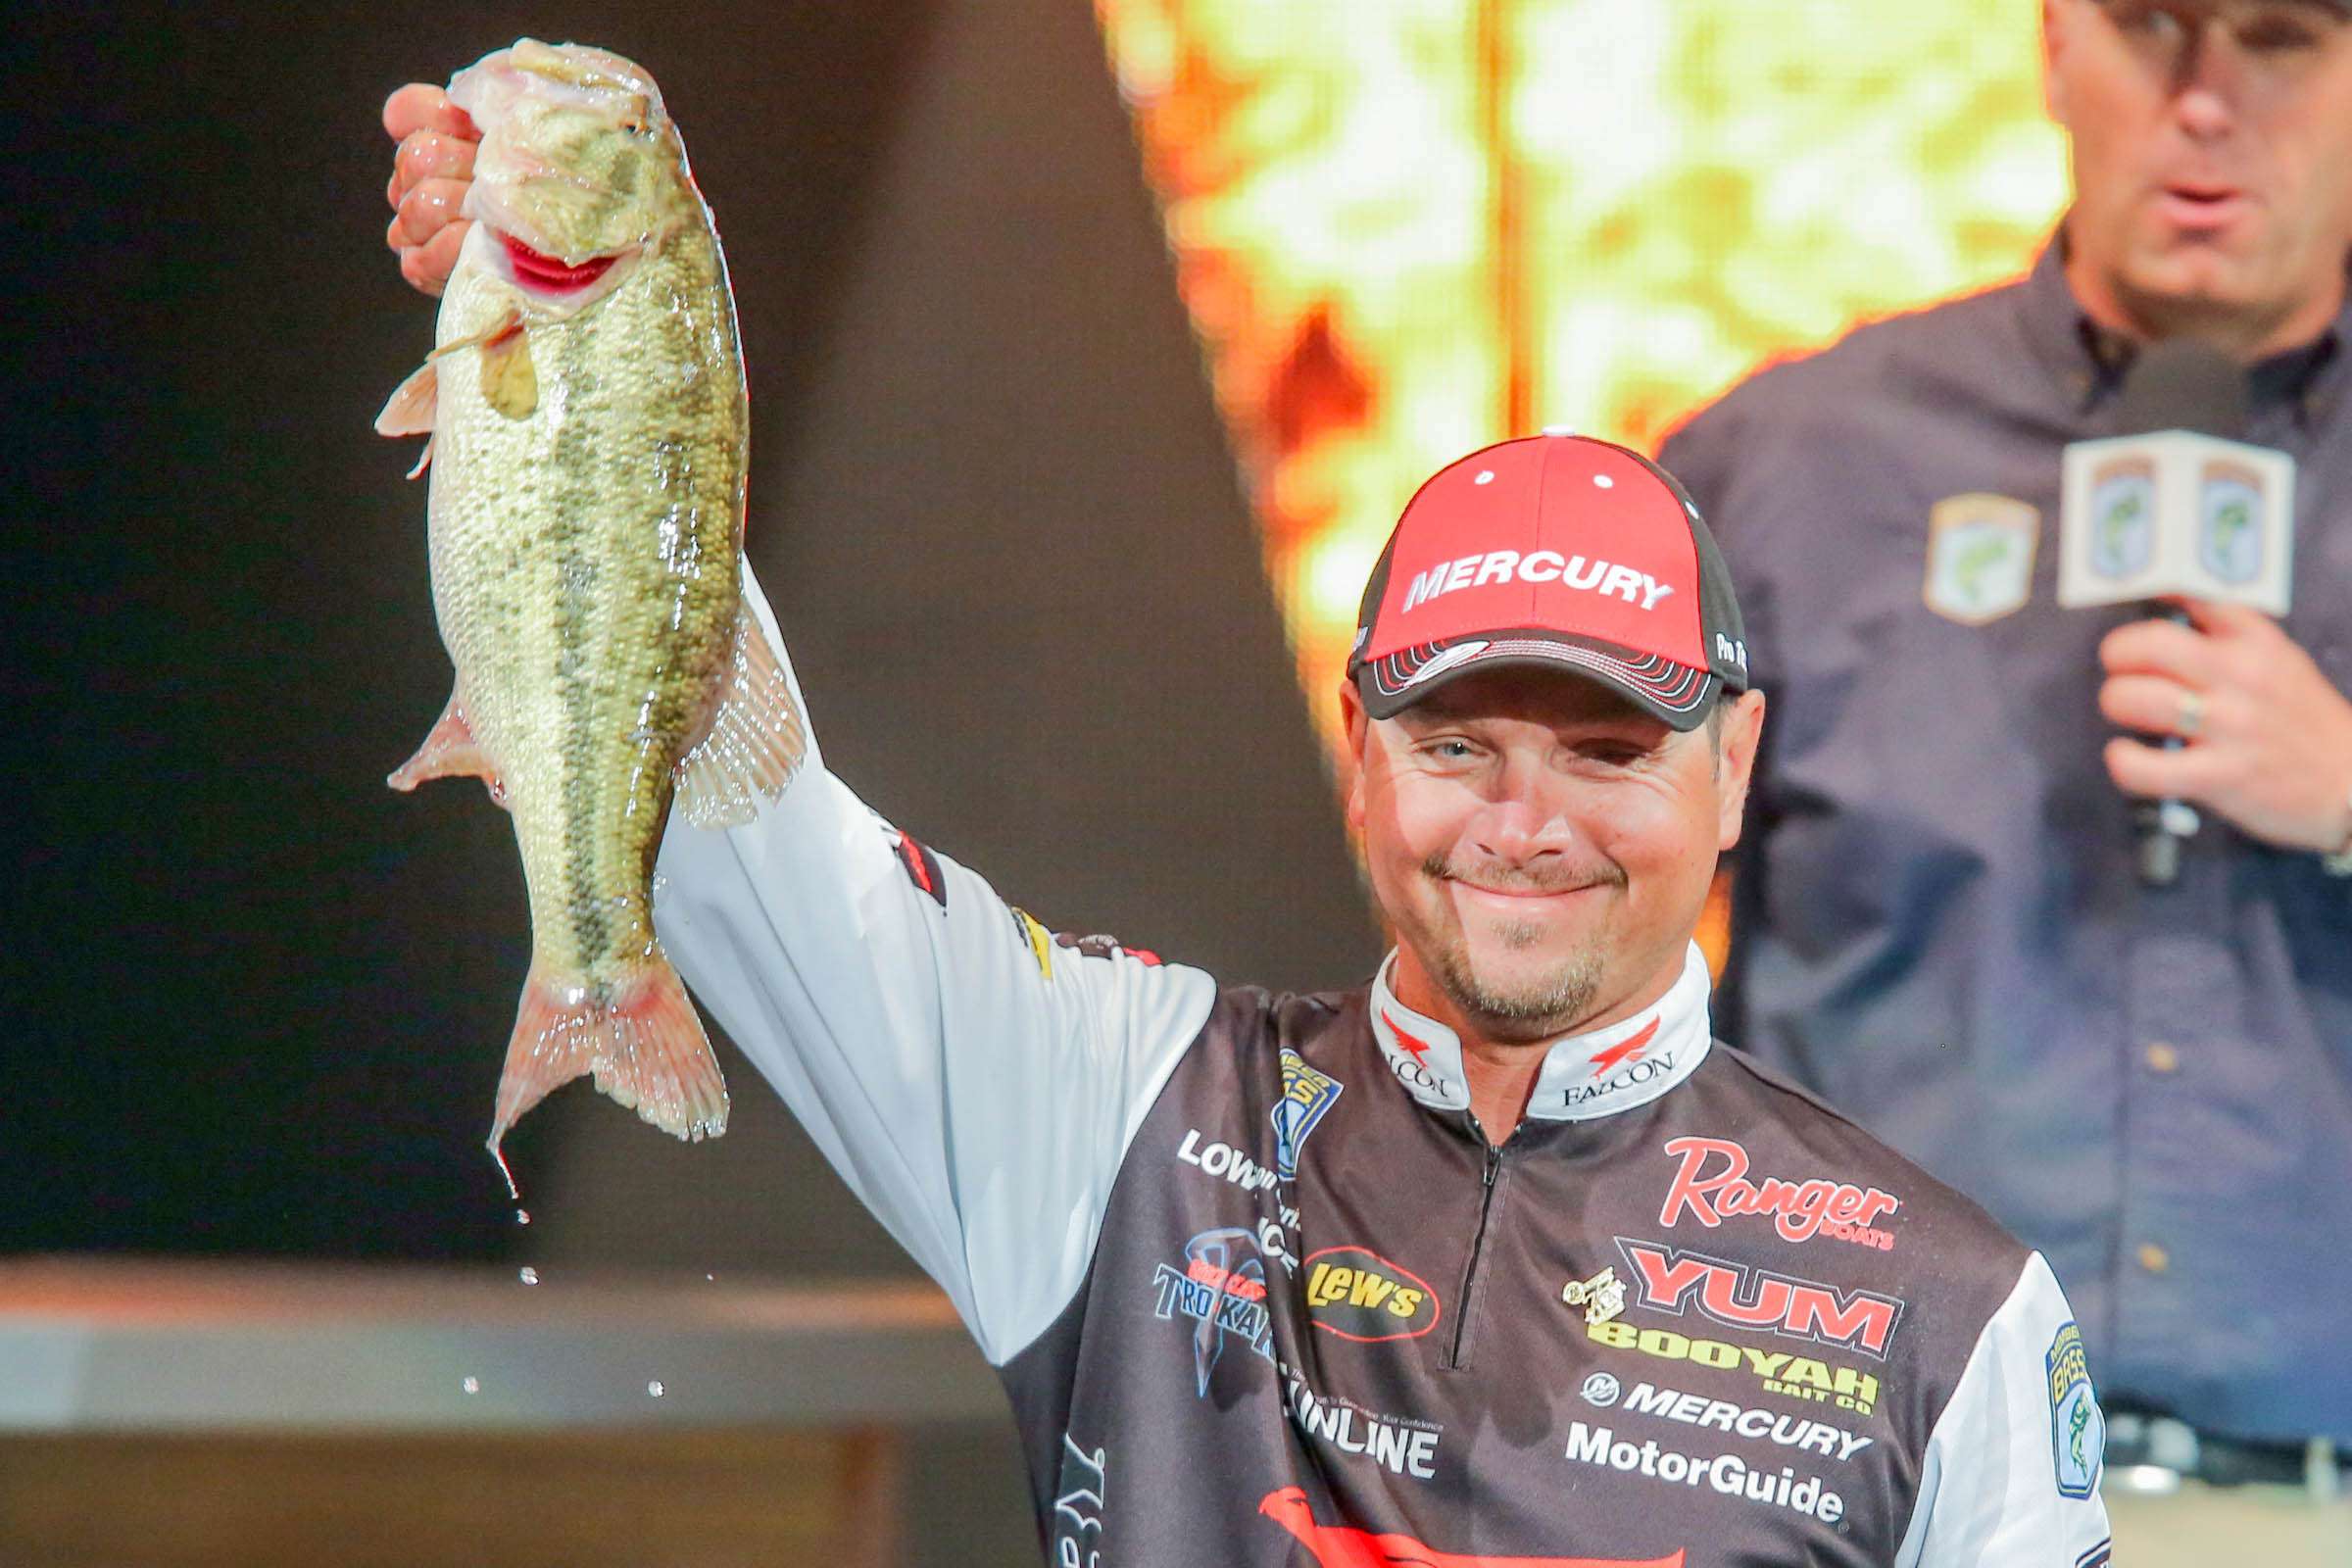 Christie was in 7th place after Day 1 at Alabama's Lake Guntersville, but he couldn't match the 22-pound, 5-ounce limit he caught that day when the three-day tournament continued.